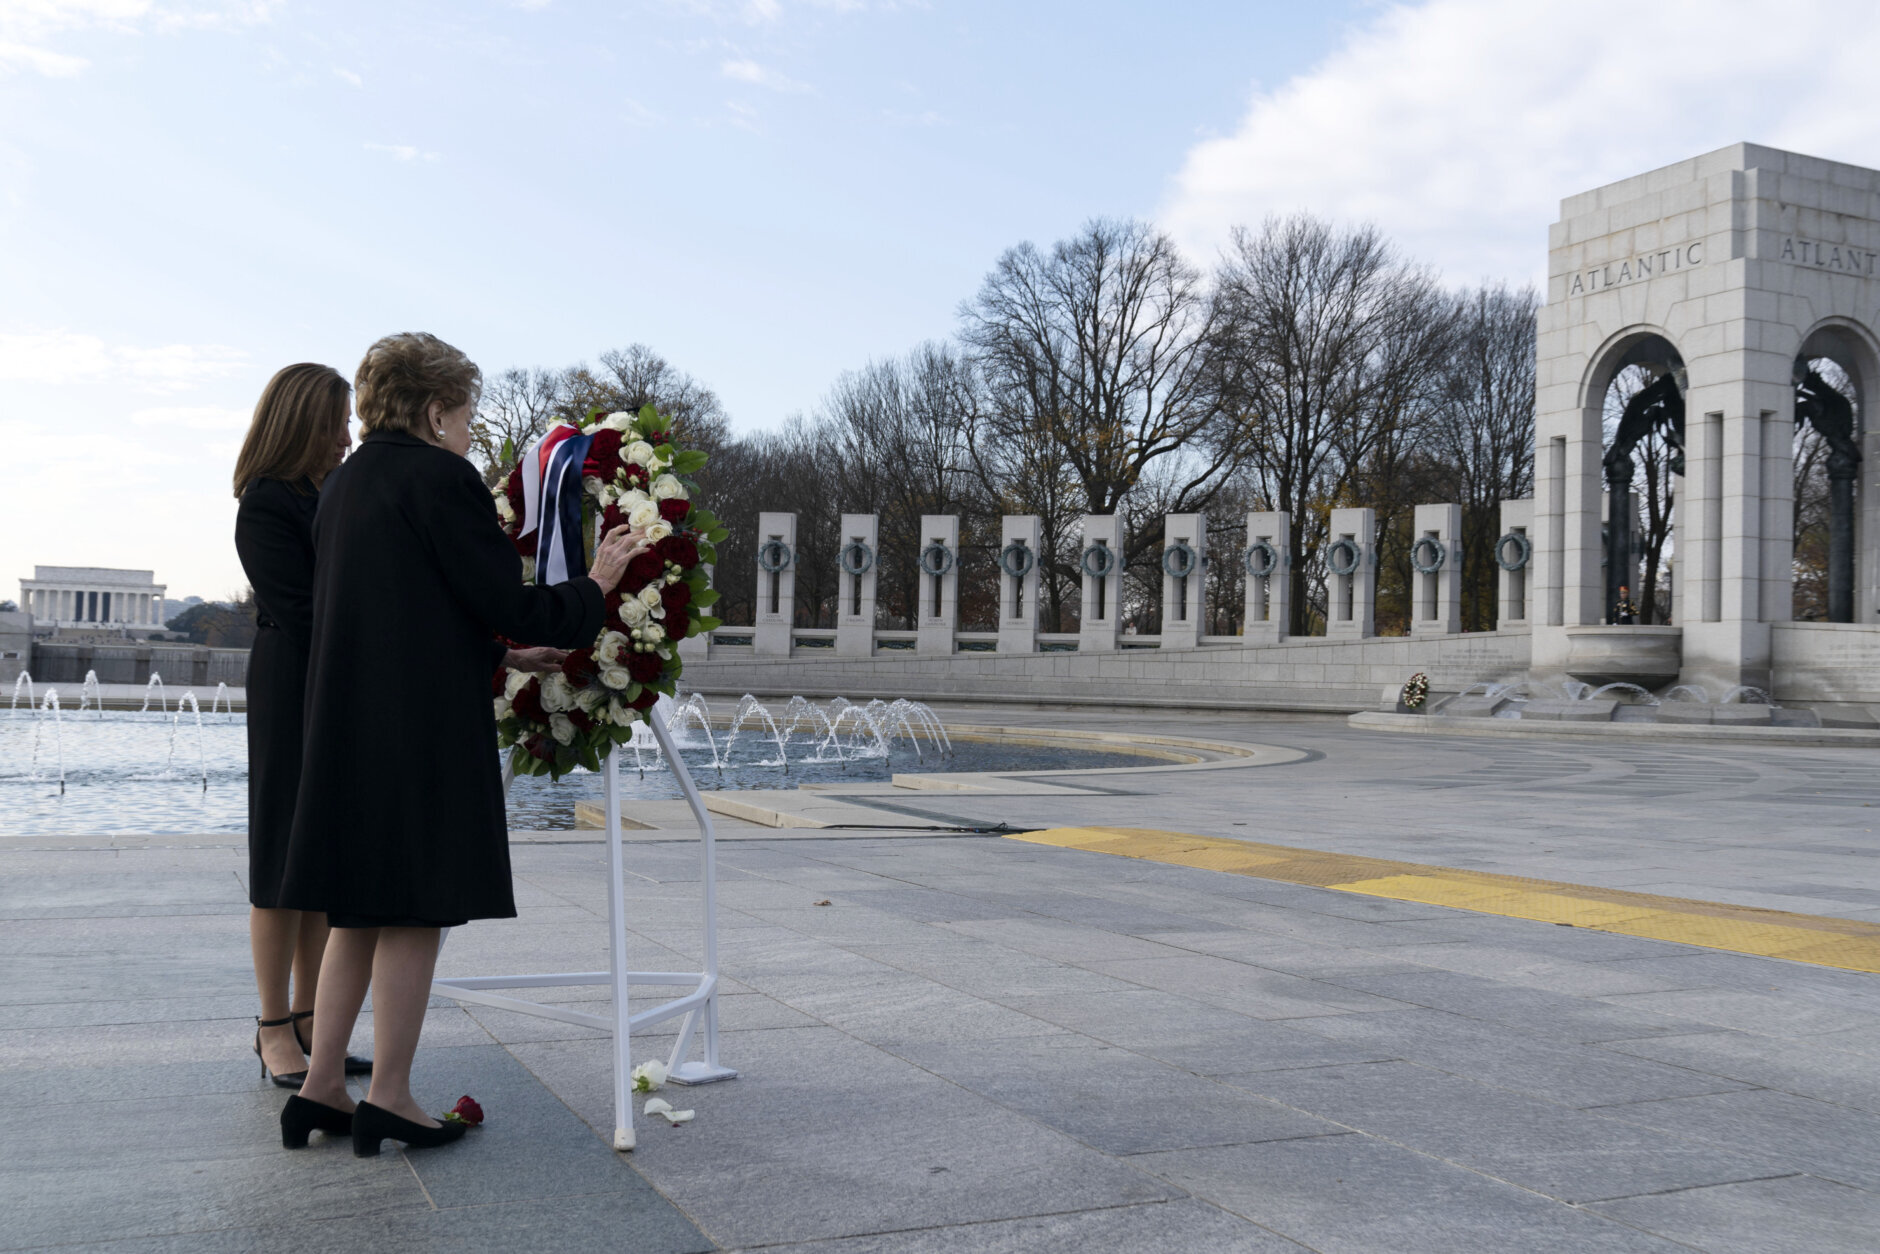 Former Sen. Elizabeth Dole with her daughter Robin Dole, lay a floral wreath during a ceremony in honor of her husband former Sen. Bob Dole, R-Kan., at the National World War II Memorial, on Friday, Dec. 10, 2021, in Washington. (AP Photo/Jose Luis Magana)